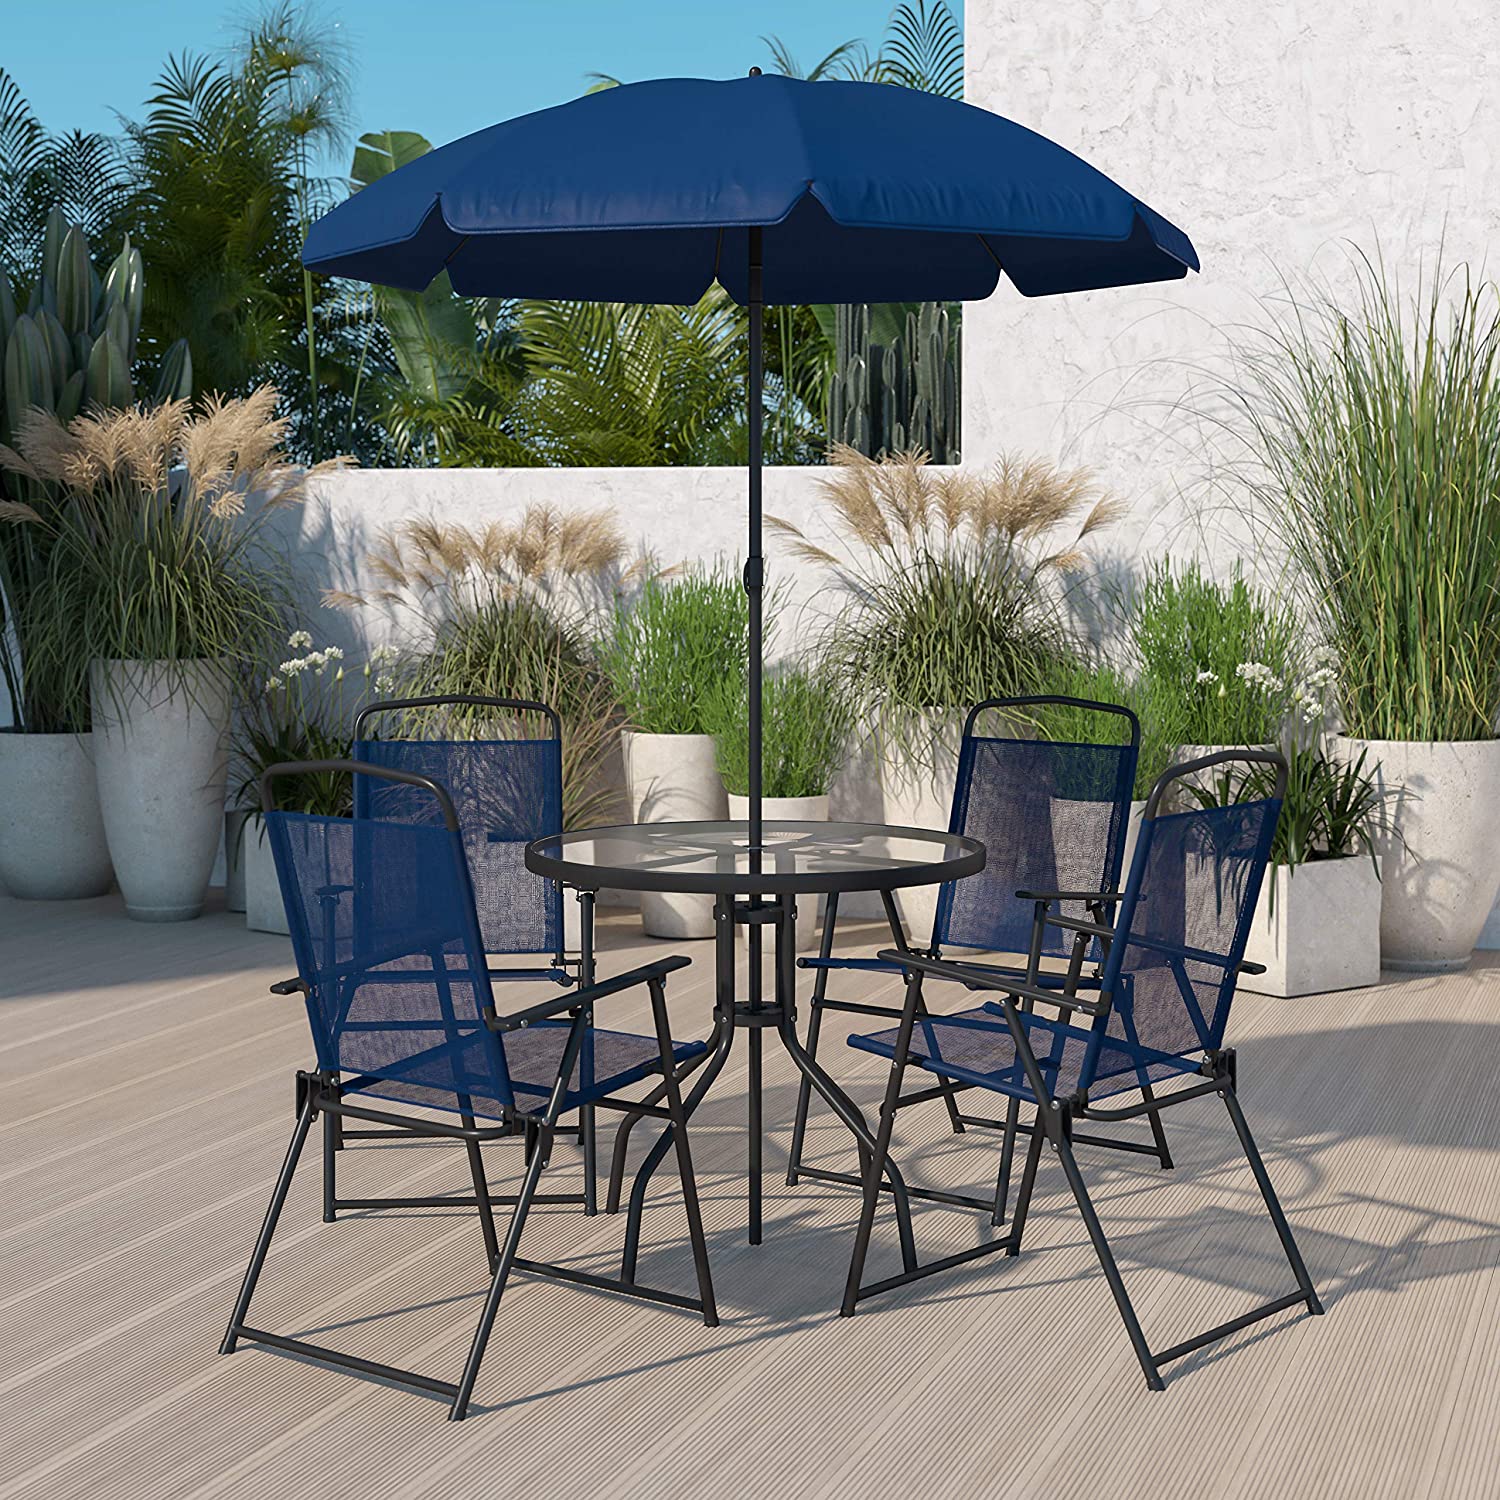 6 Piece Patio Garden Set With Umbrella Table And Set Of 4 Folding Chairs